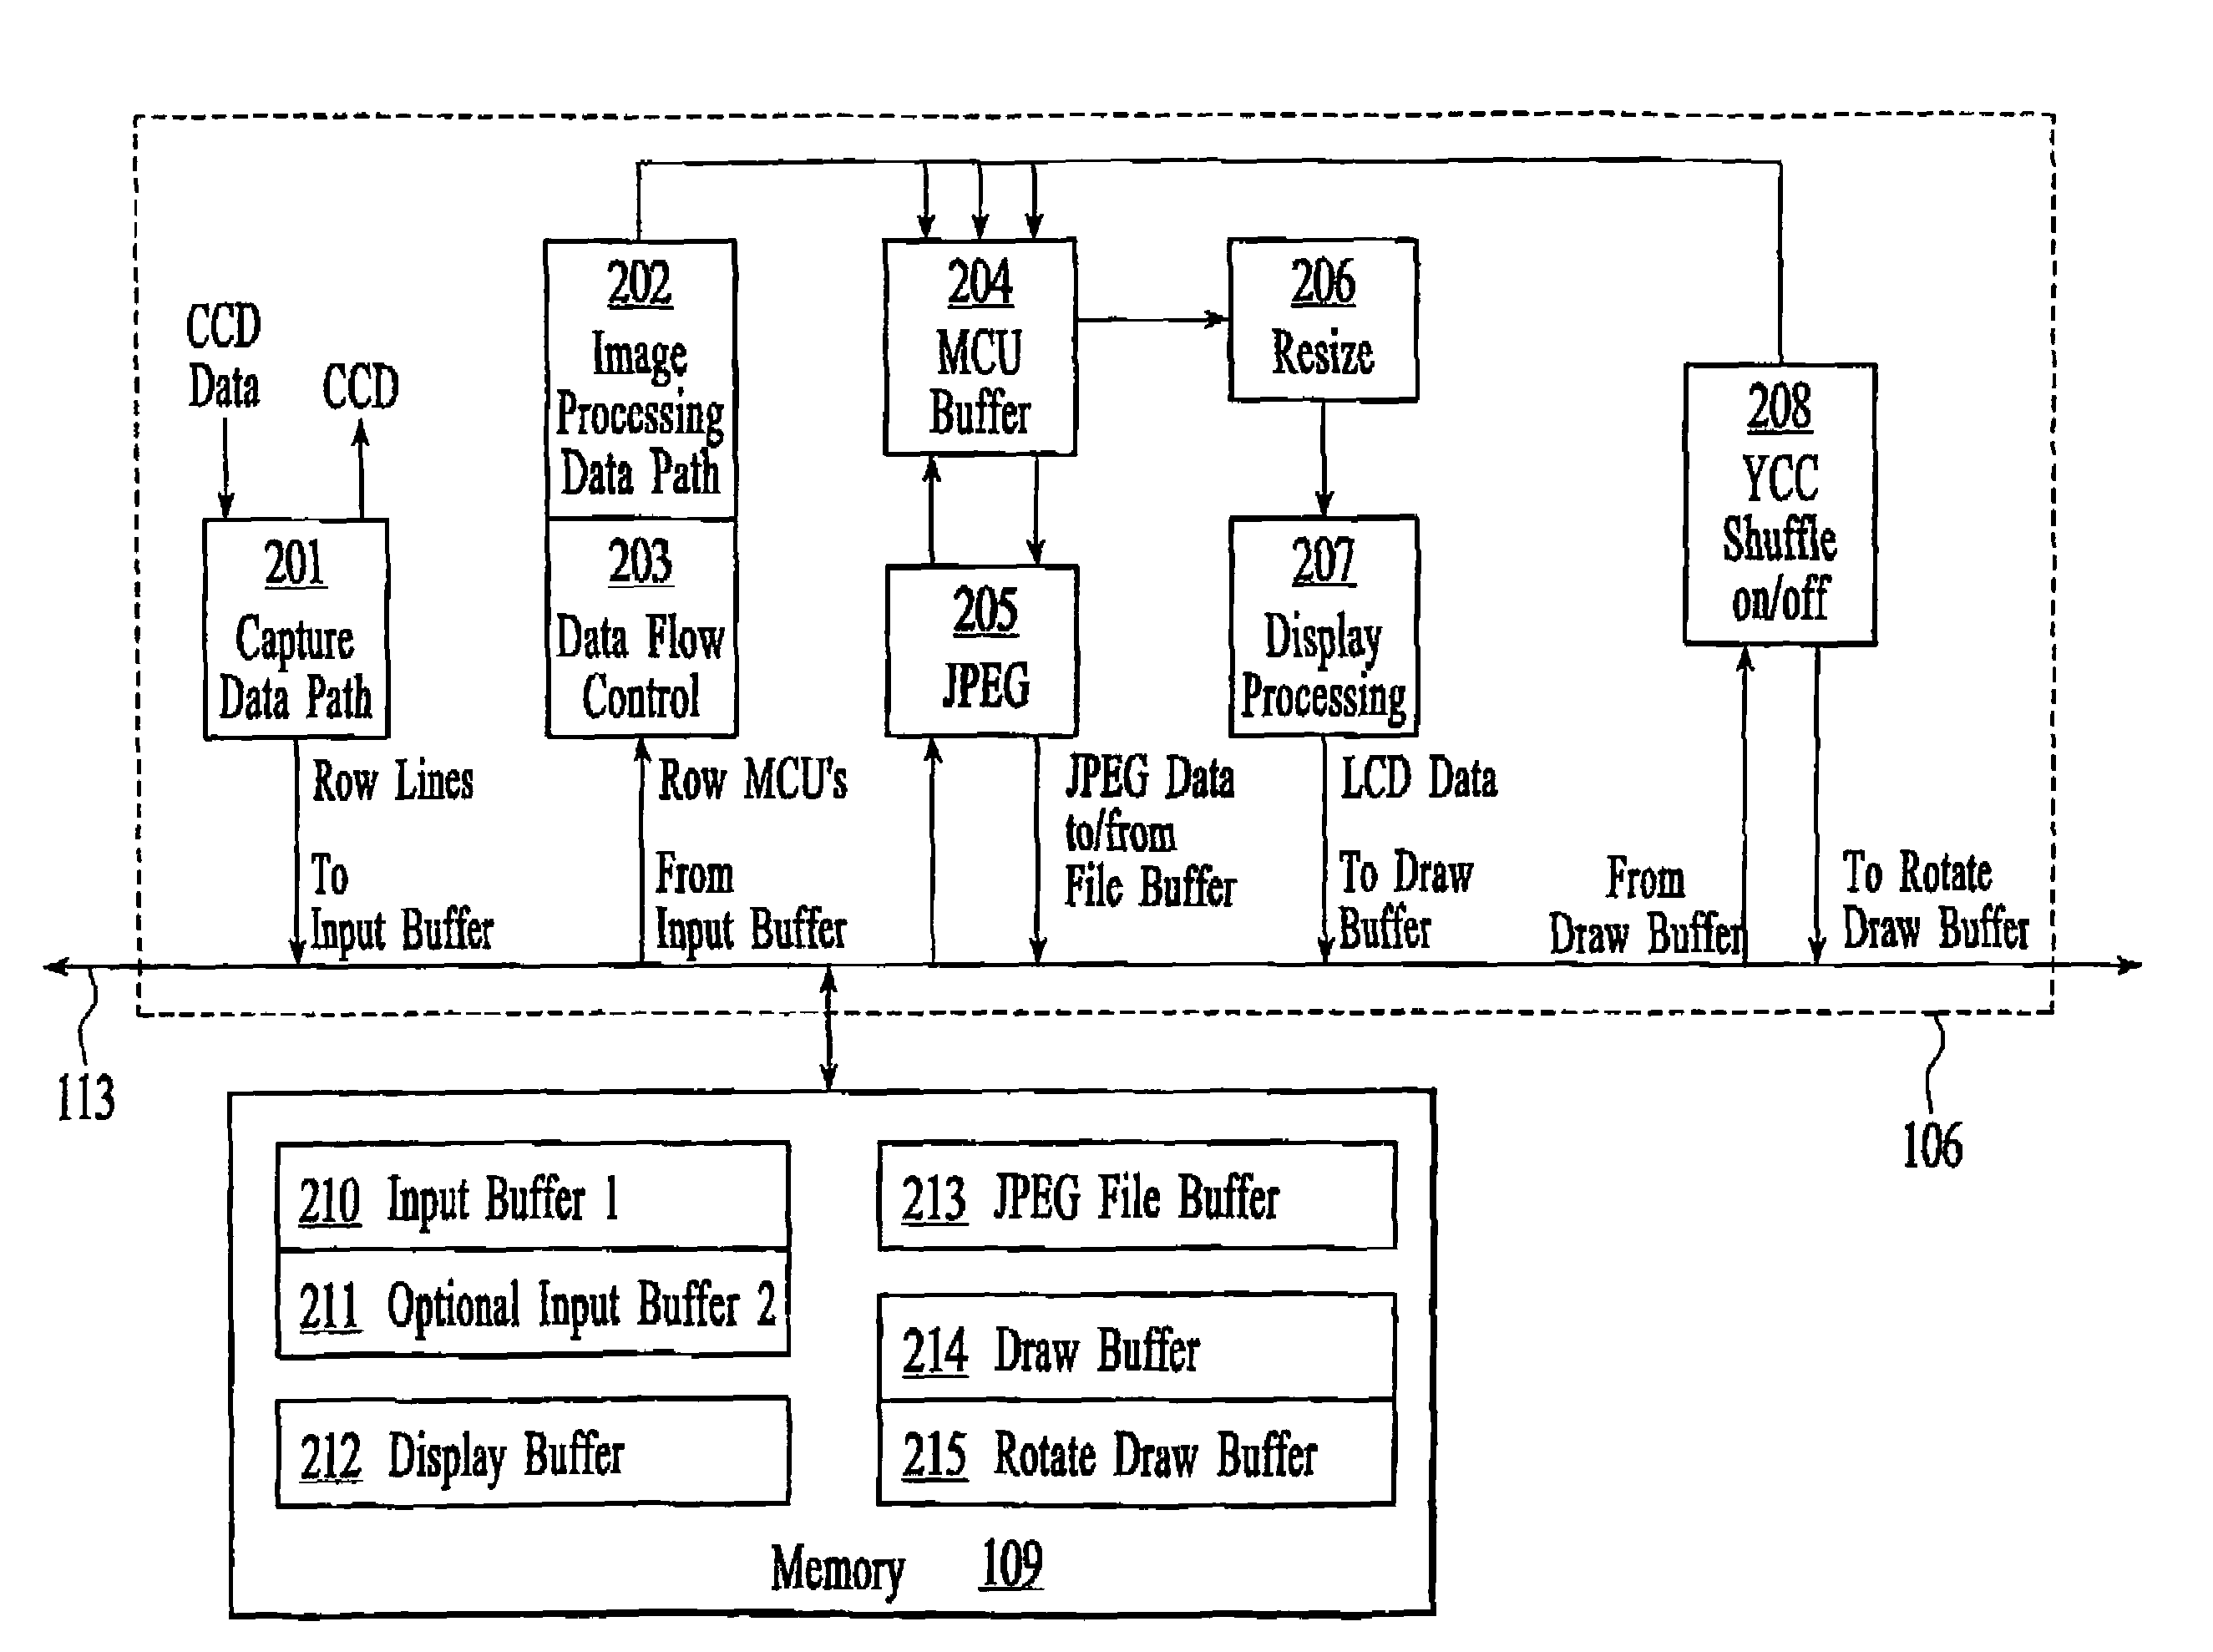 Image processing system for high performance digital imaging devices